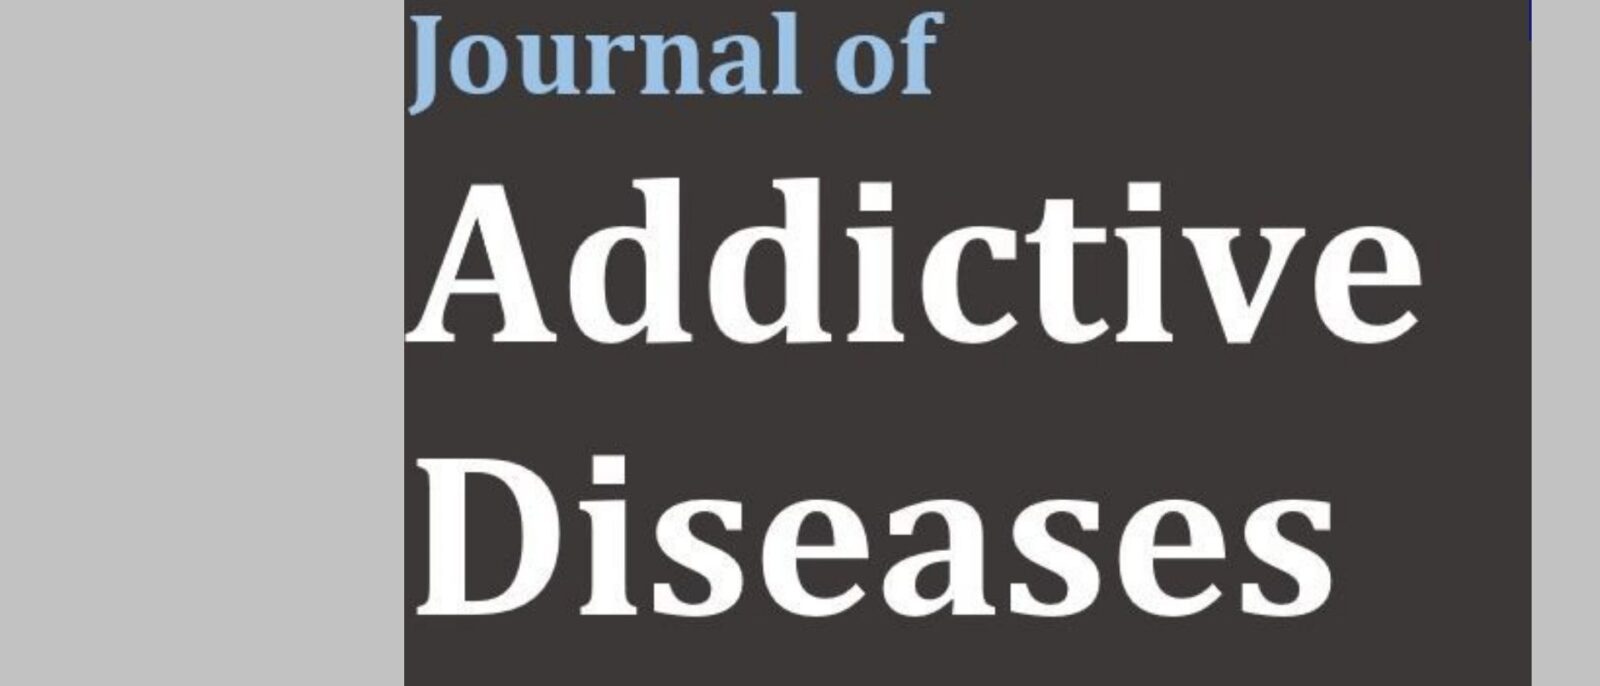 Journal of Addictive Diseases feature’s HU professor’s research